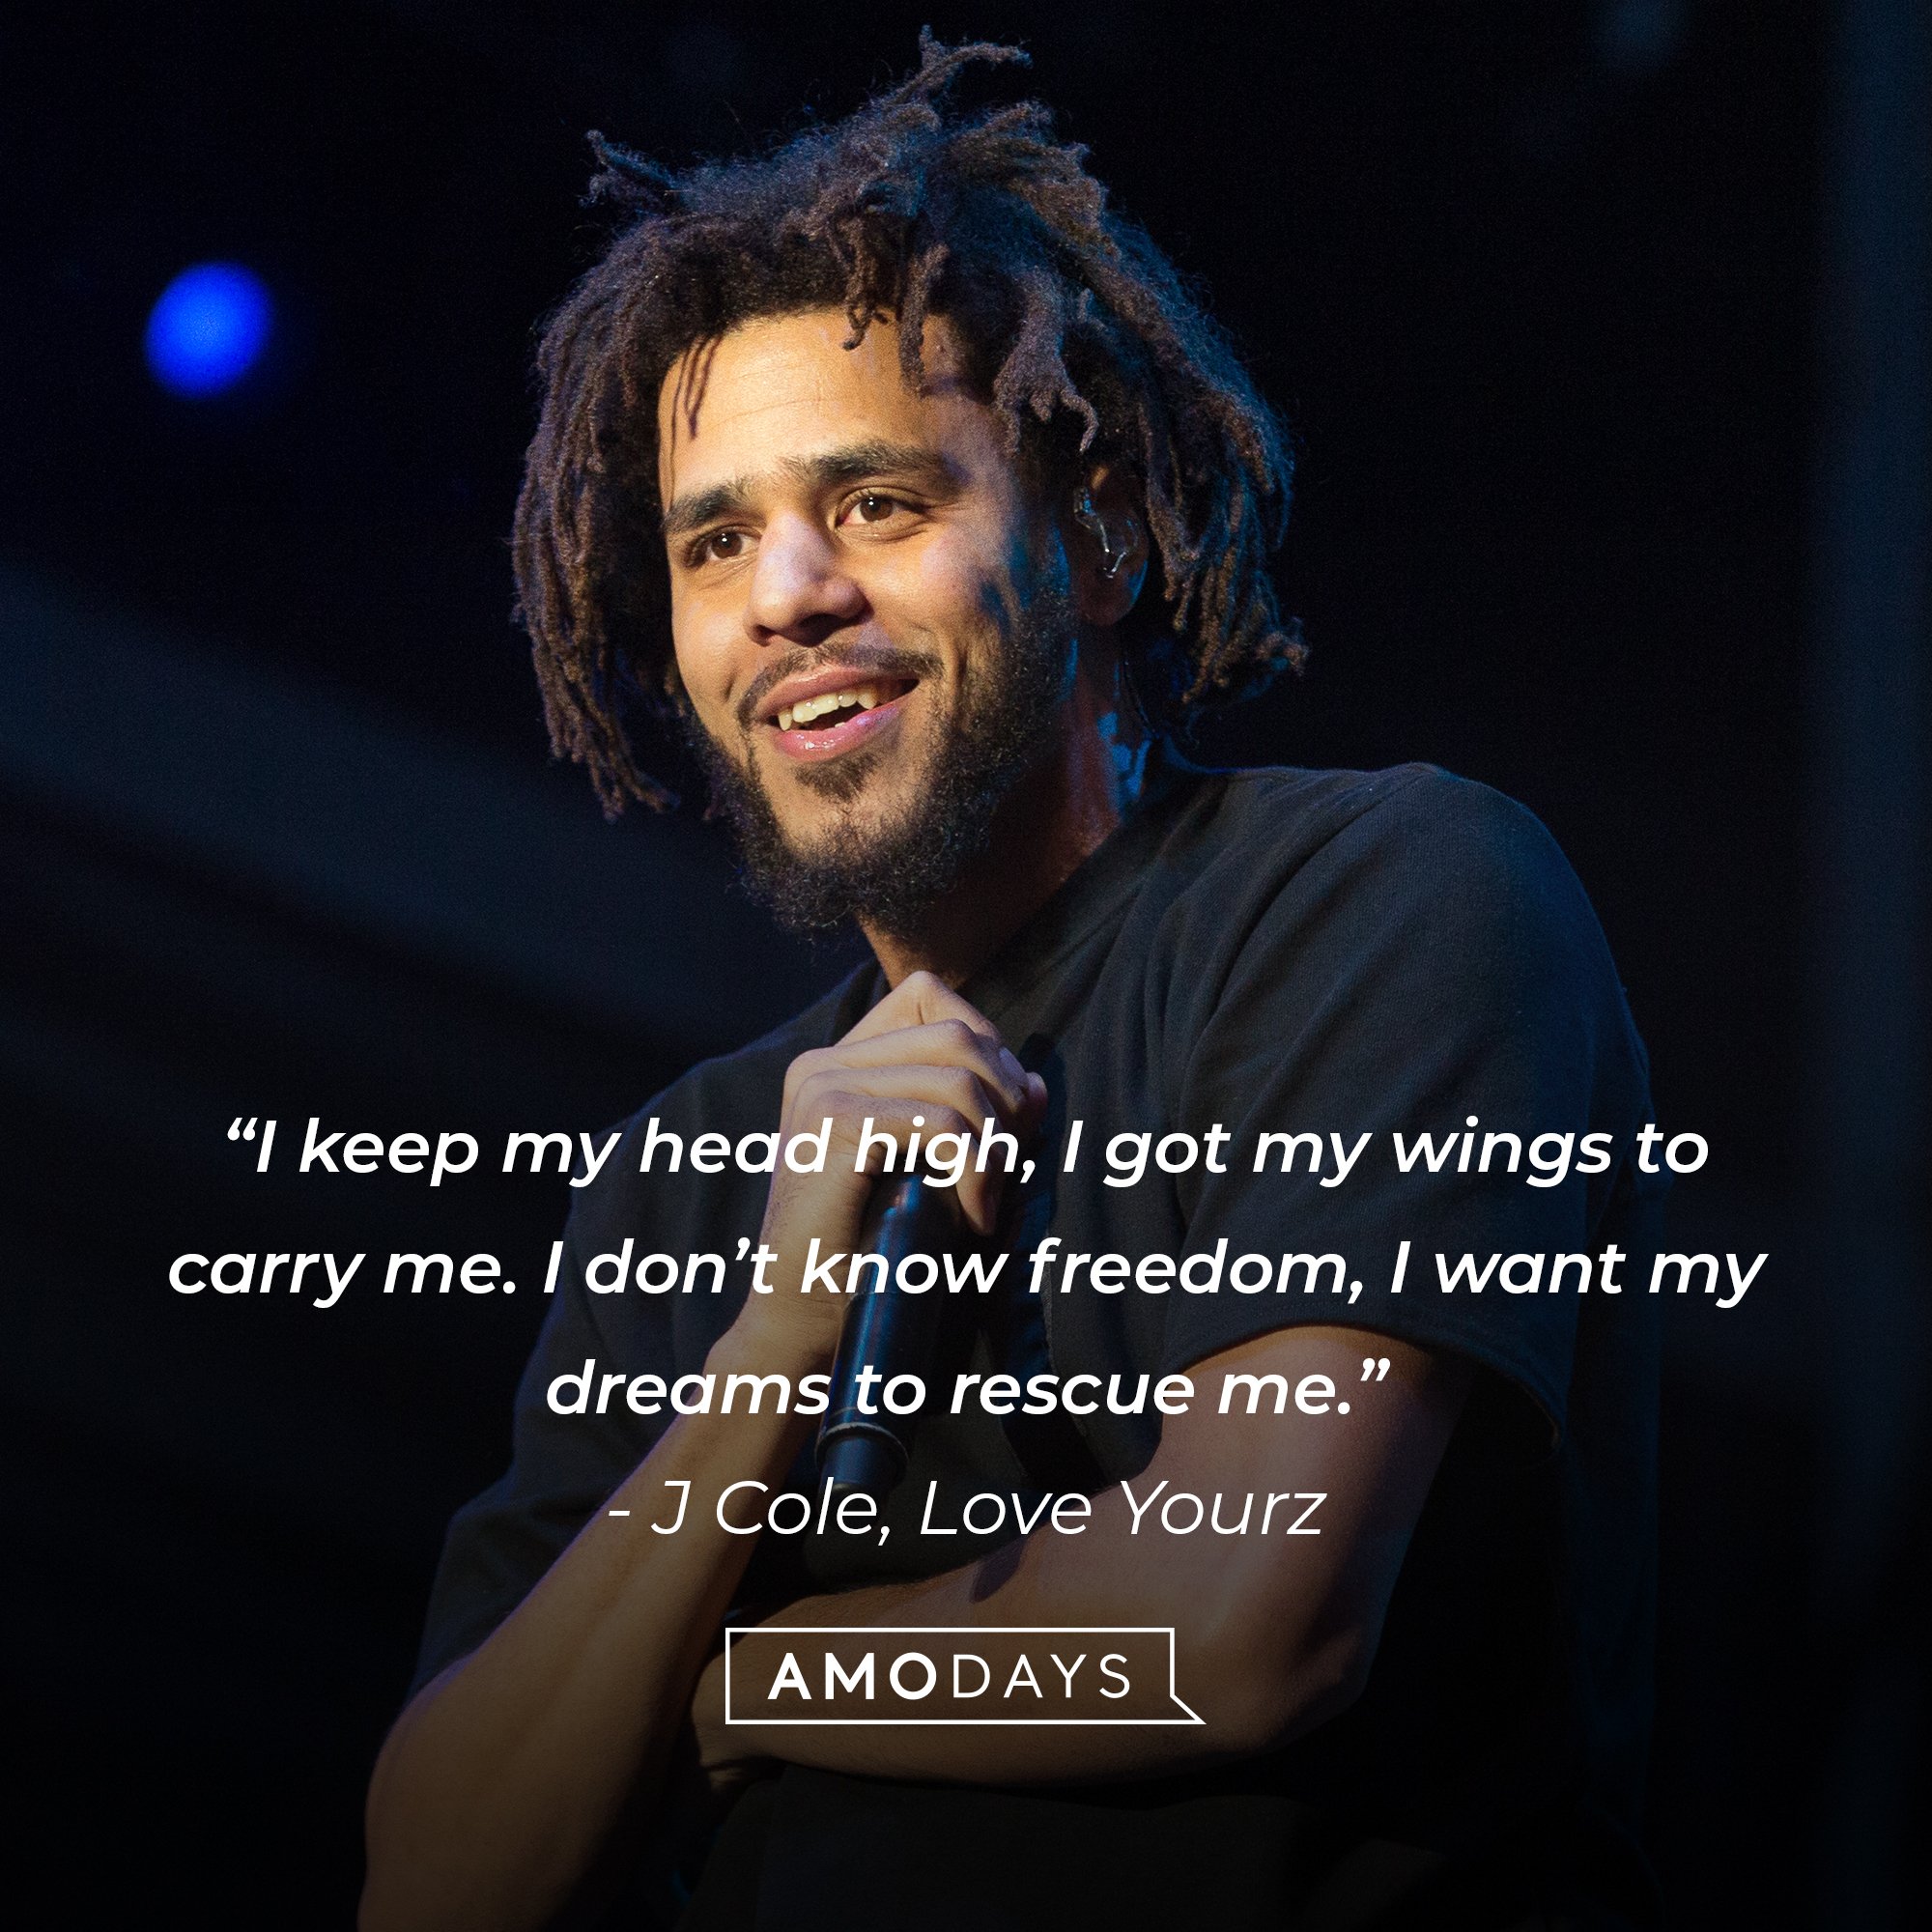  J Cole's quote: “I keep my head high, I got my wings to carry me. I don’t know freedom, I want my dreams to rescue me.” | Image: AmoDays